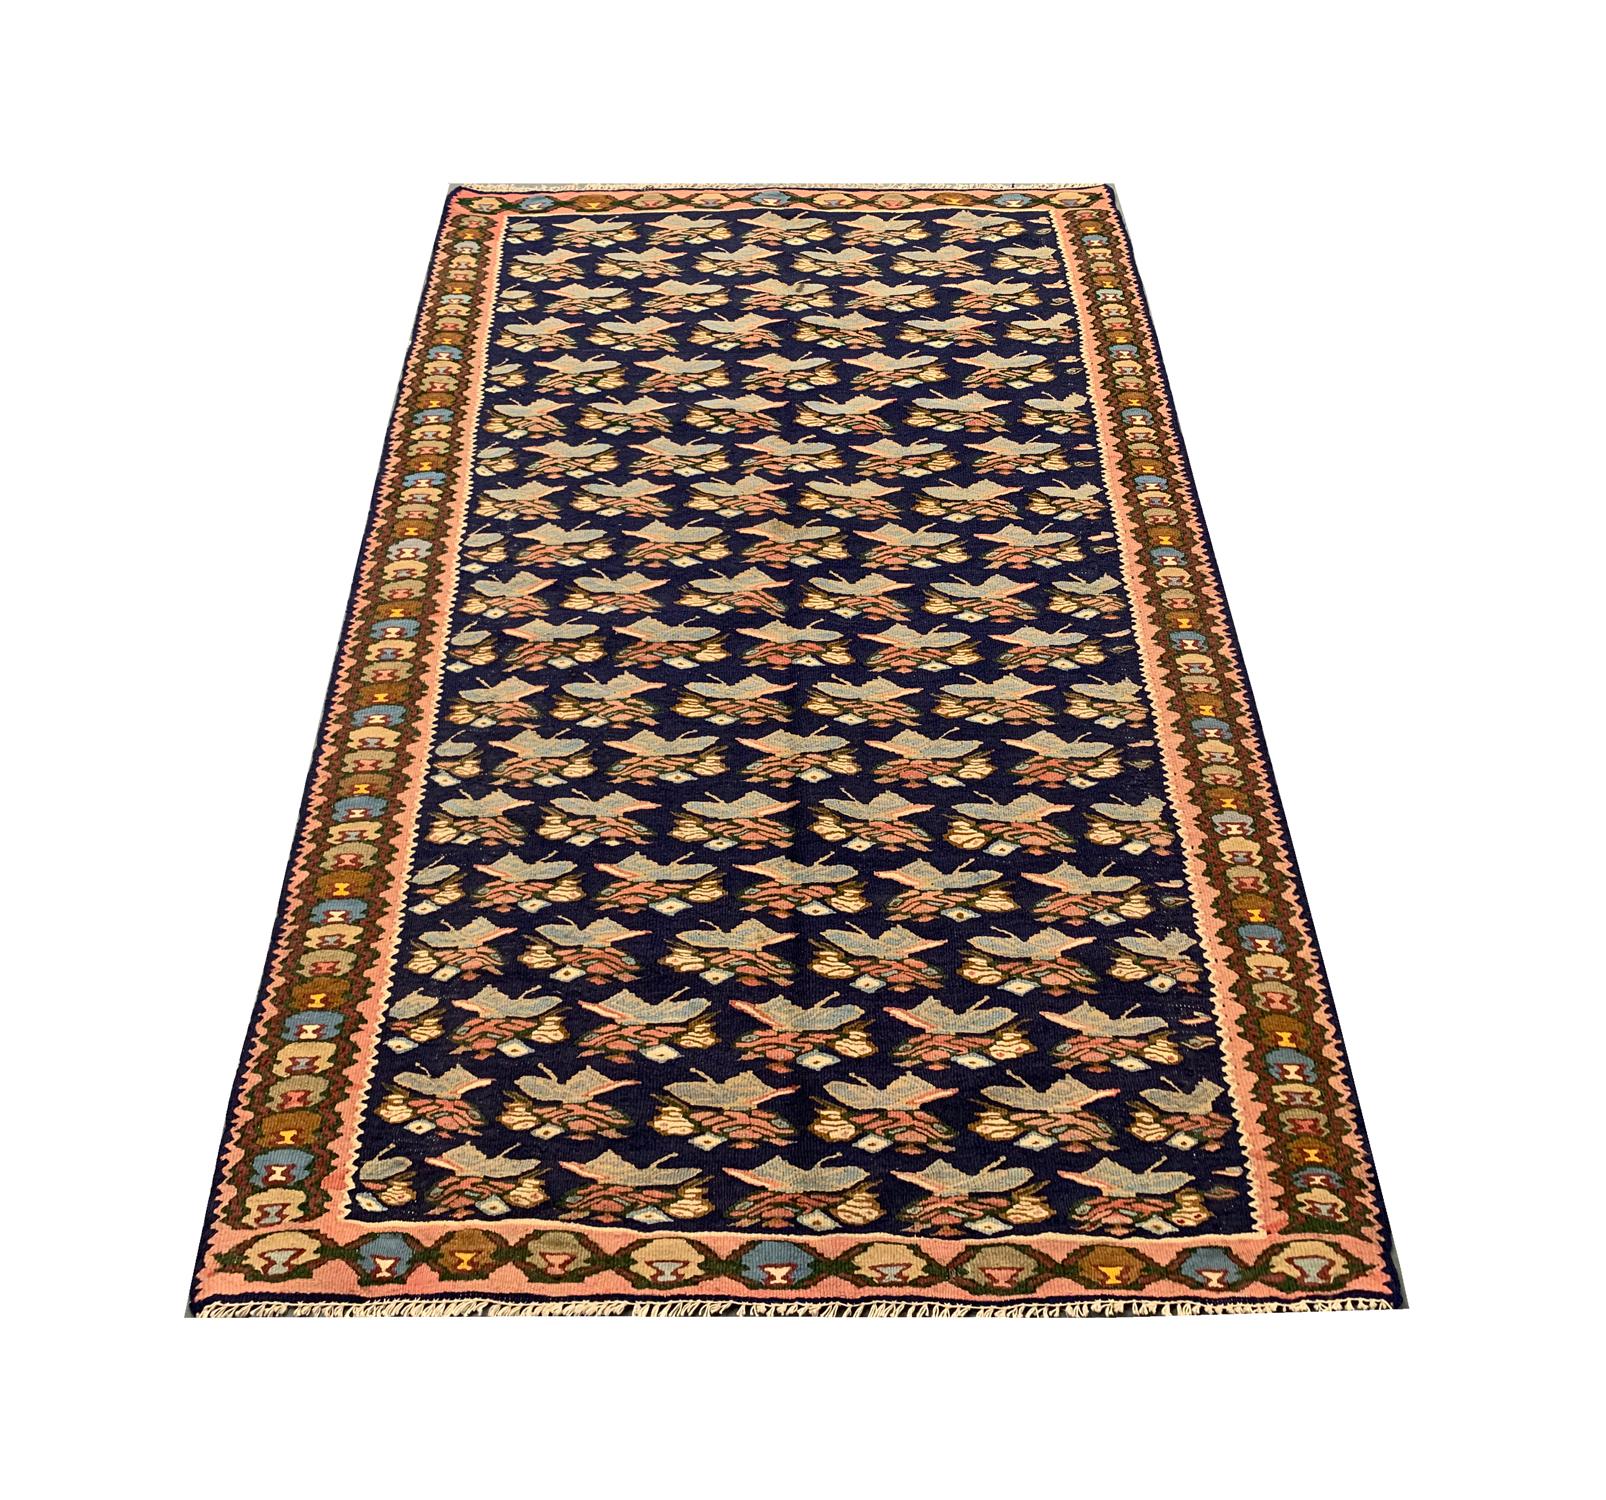 This beautiful antique Caucasian rug has been woven with a fantastic all-over design with a blue background and green, brown and cream accents that make up the repeat floral pattern. A repeat pattern border then encloses this simple yet elegant